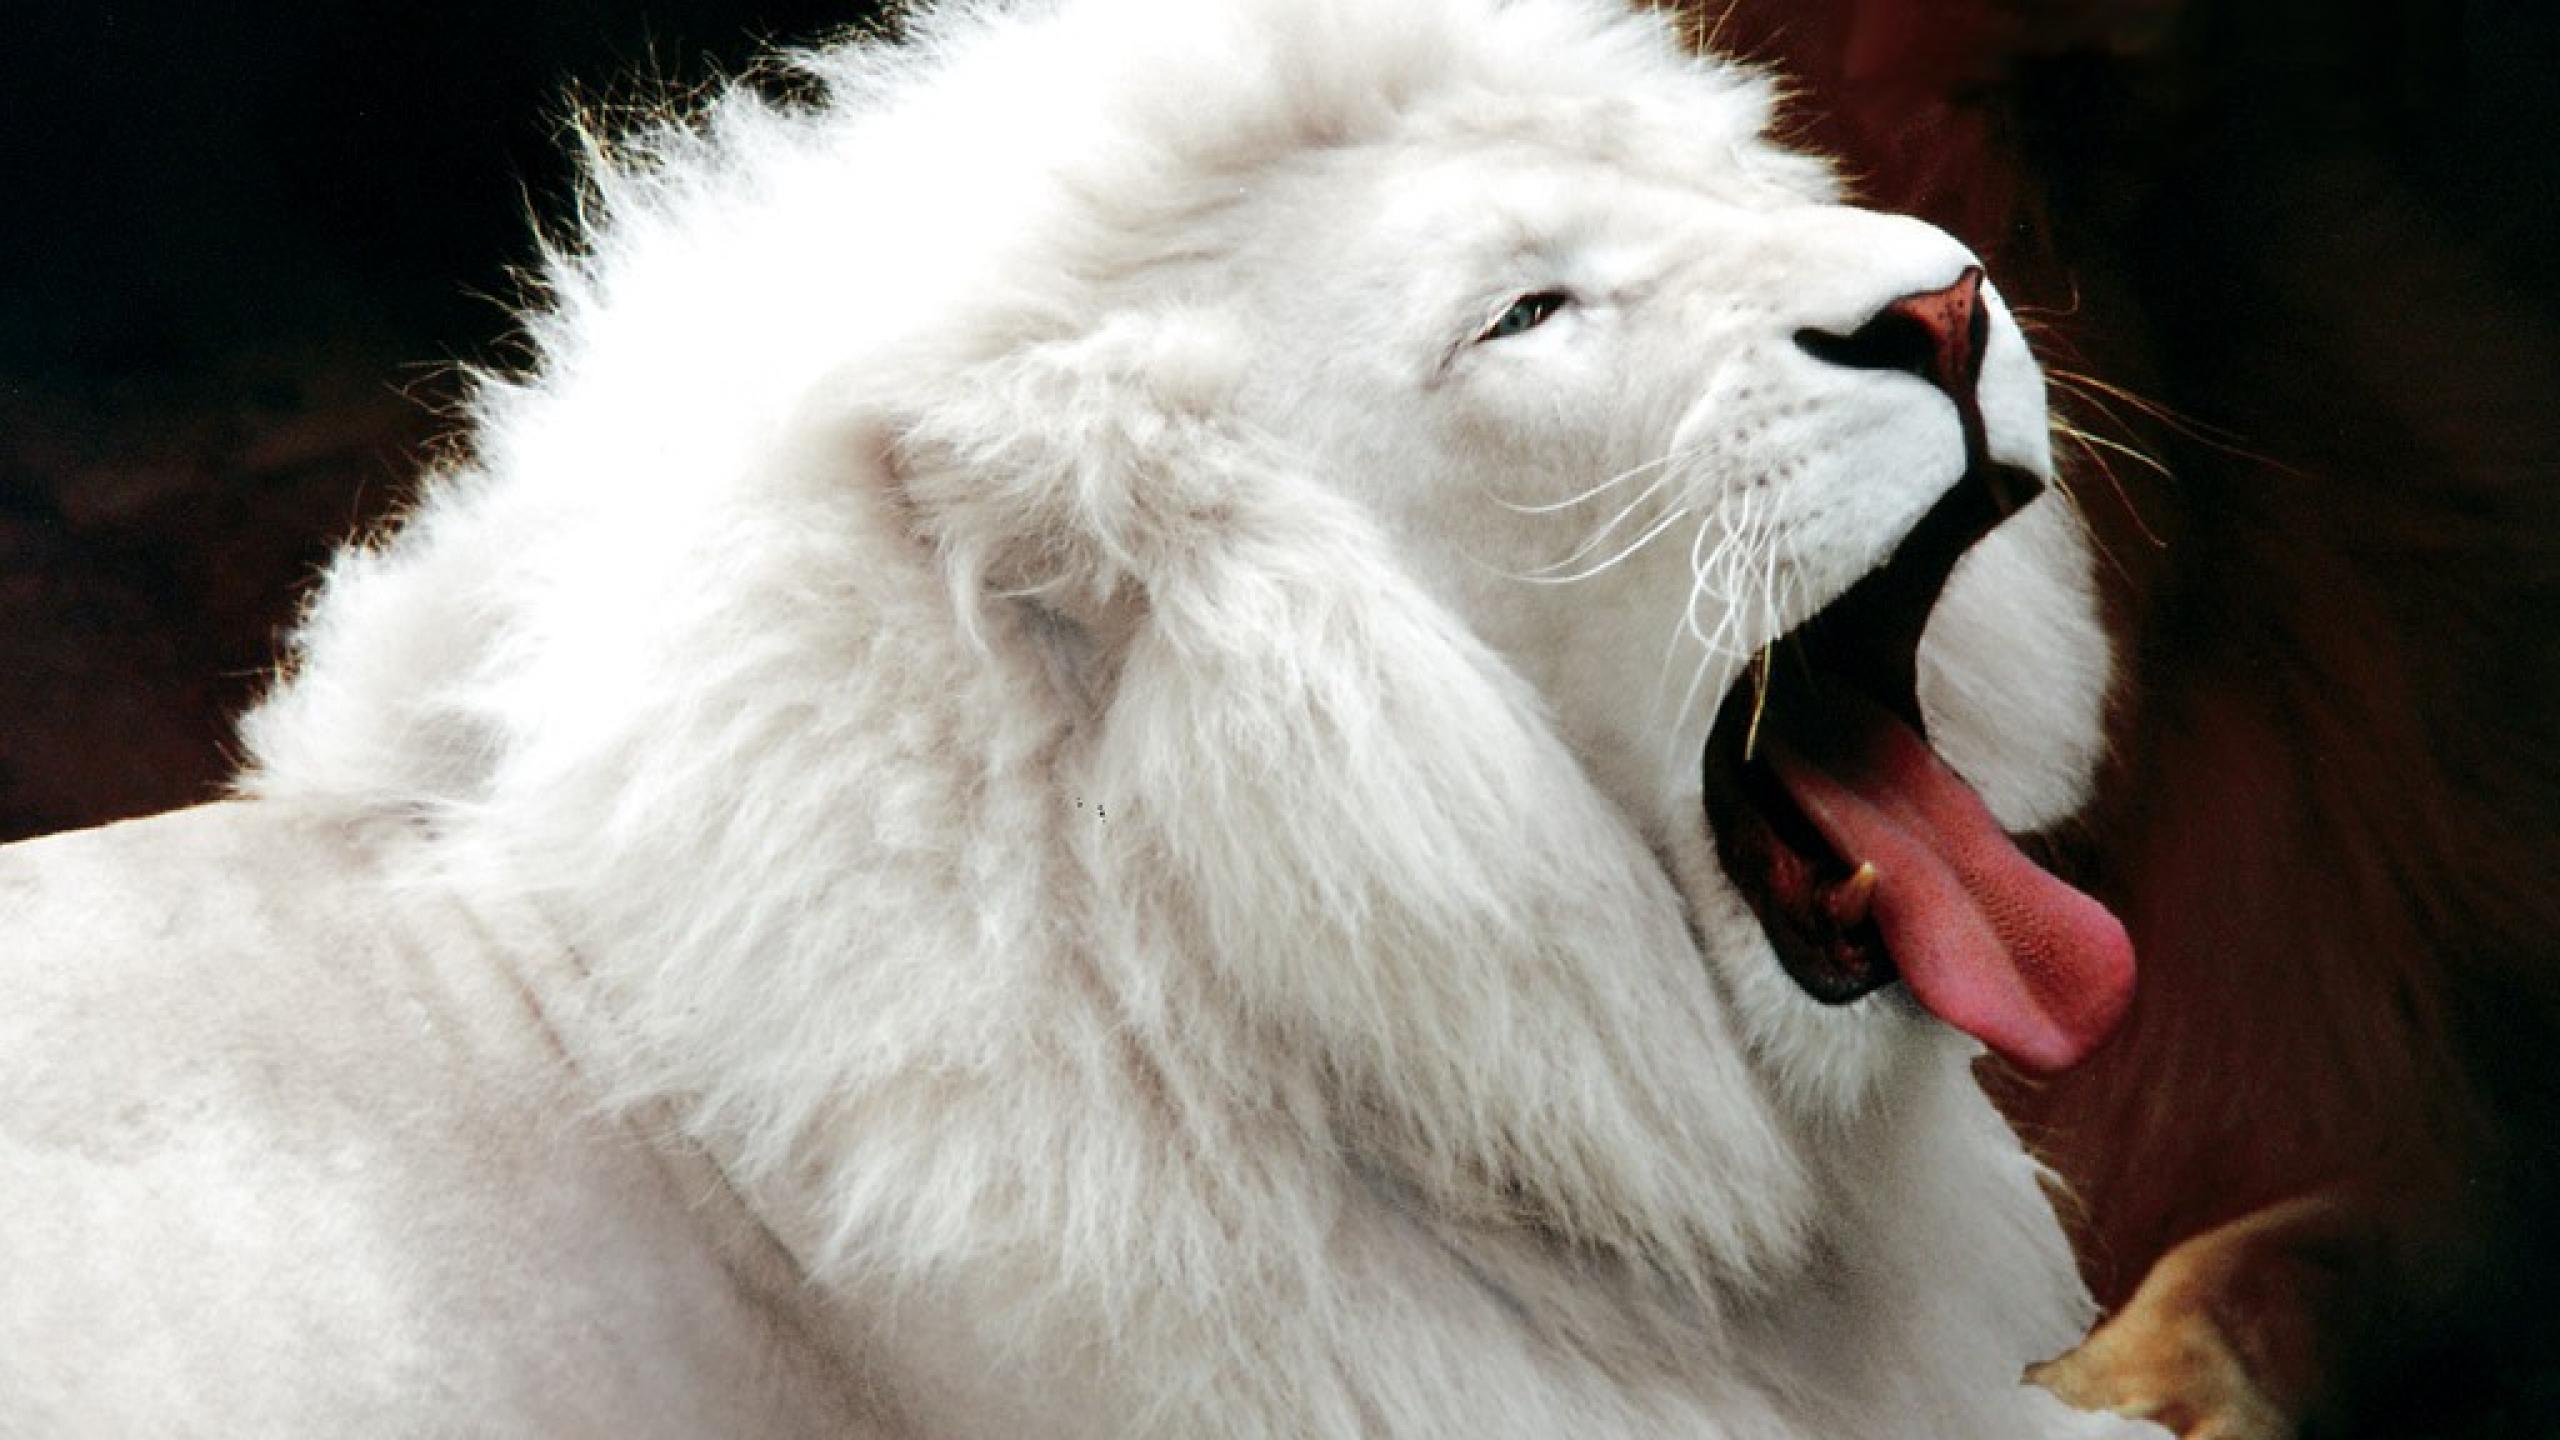 White Lions Roaring Wallpaper Images amp Pictures   Becuo